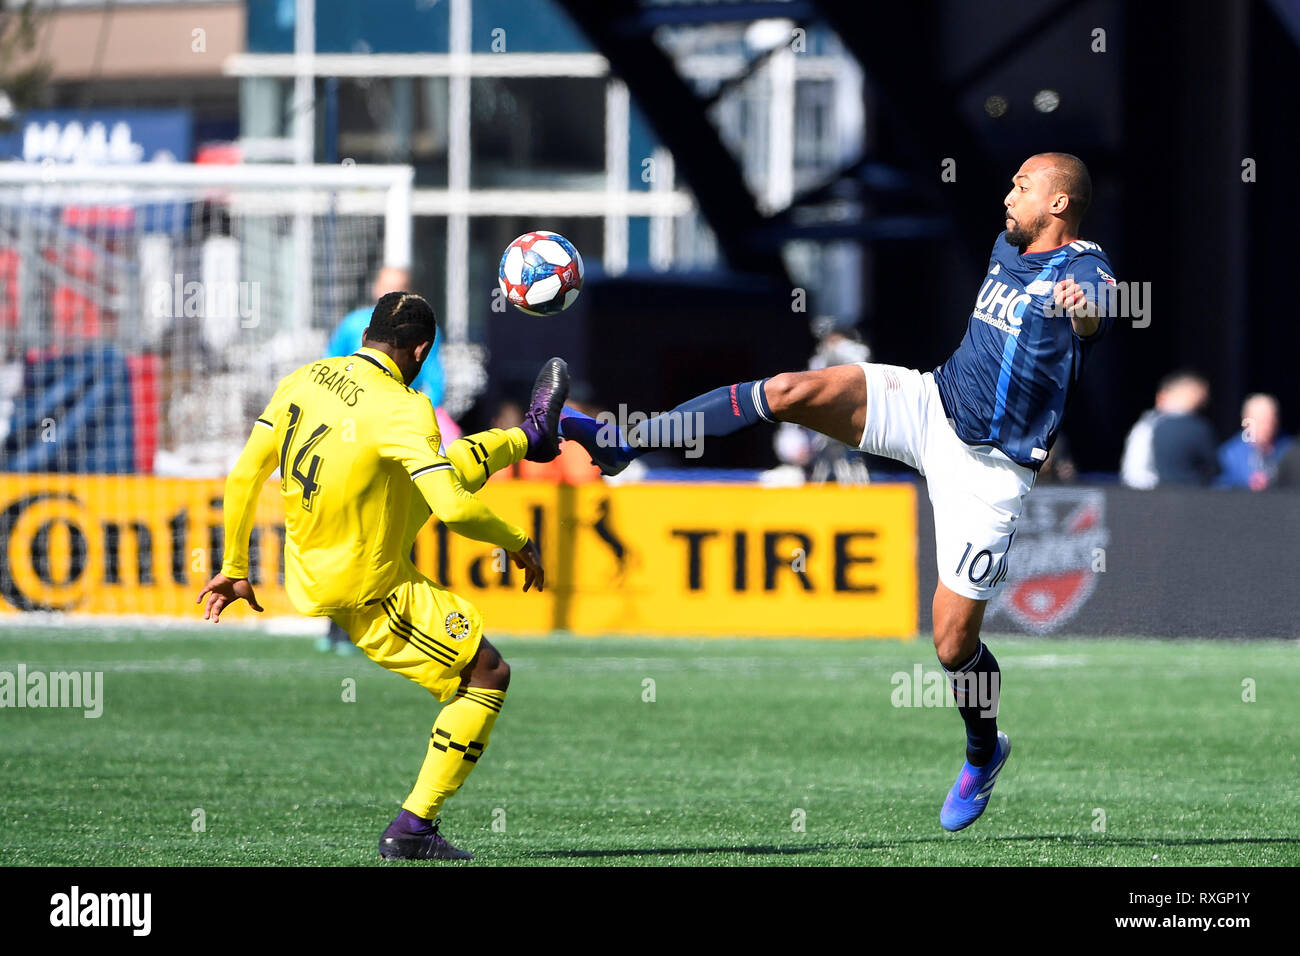 Foxborough Massachusetts, USA. 9th Mar, 2019. Columbus Crew defender Waylon Francis (14) and New England Revolution forward Teal Bunbury (10) battle for the ball on the pitch during the MLS game between Columbus Crew and the New England Revolution held at Gillette Stadium in Foxborough Massachusetts. Columbus defeats New England 2-0. Eric Canha/CSM/Alamy Live News Stock Photo